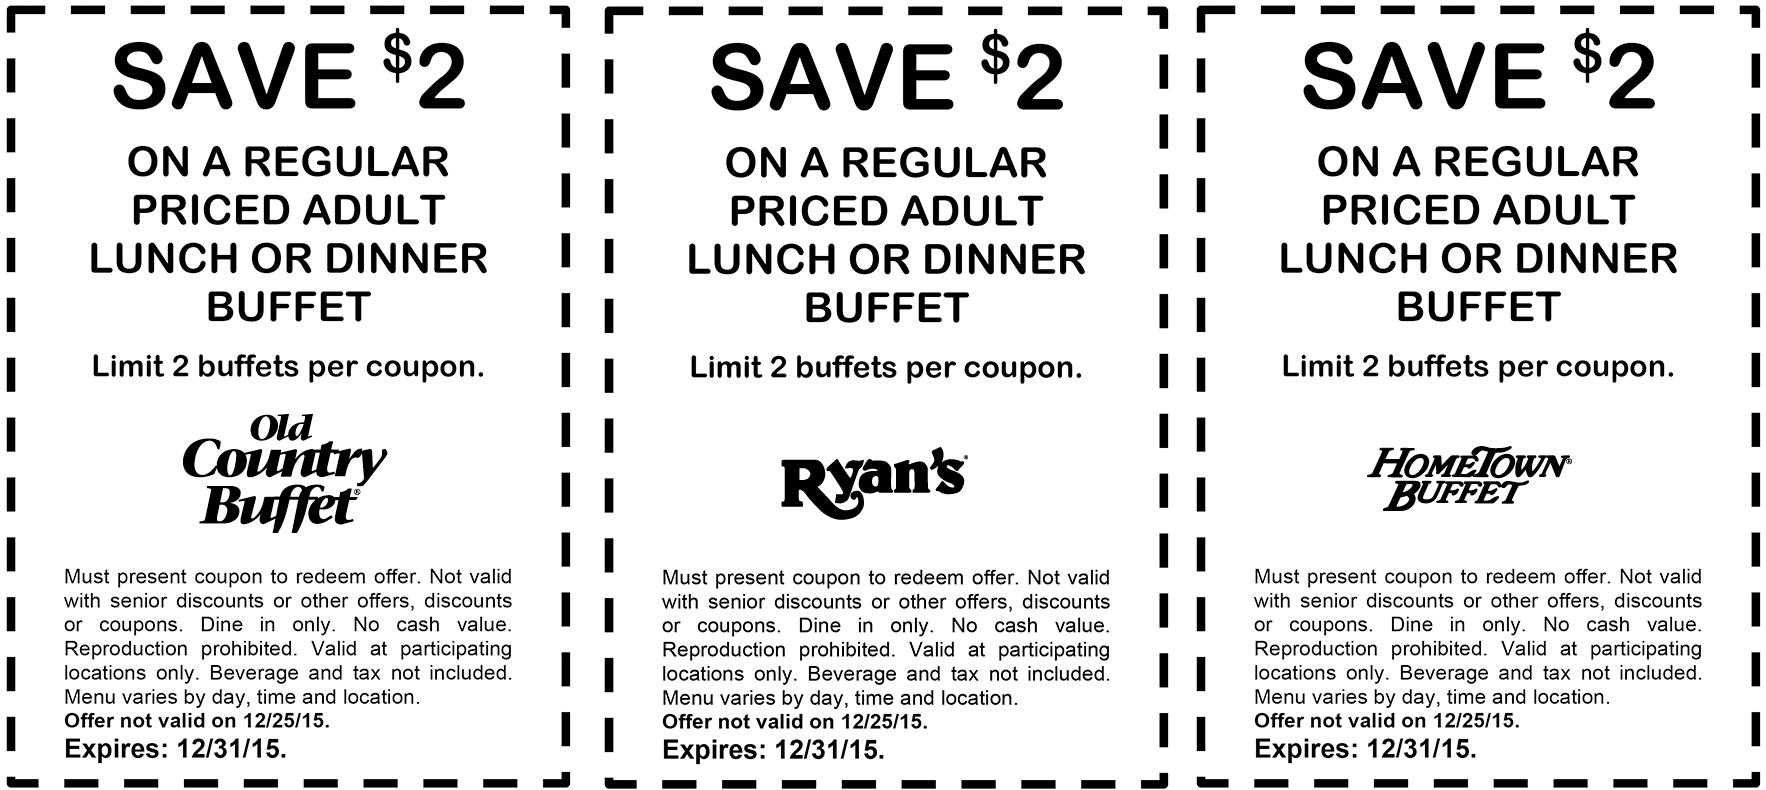 Old Country Buffet Coupons - $2 Off Your Buffet At Ryans, Hometown - Old Country Buffet Printable Coupons Buy One Get One Free